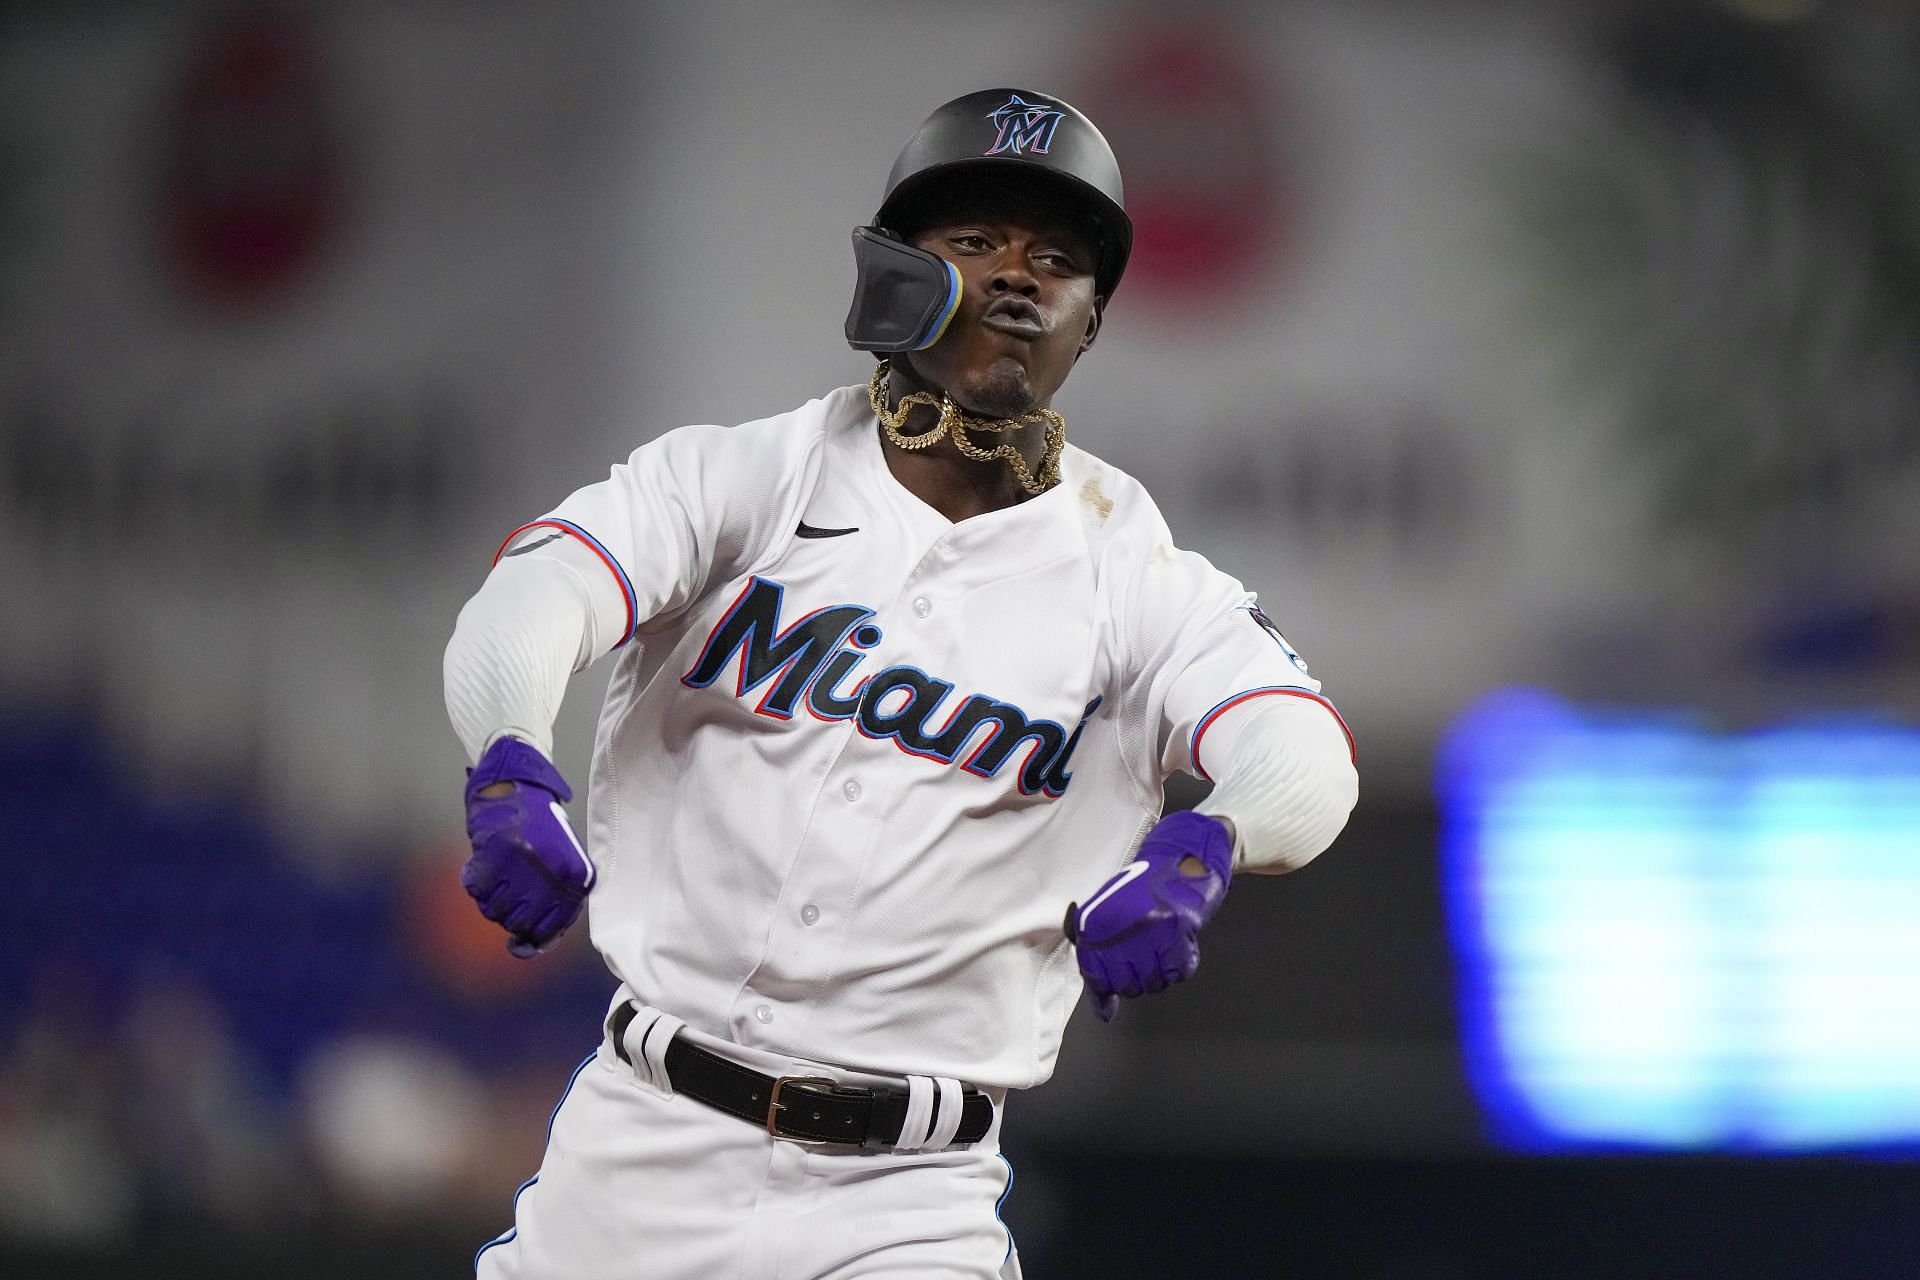 2022 Marlins Season Review: Why team crumbled without Jazz